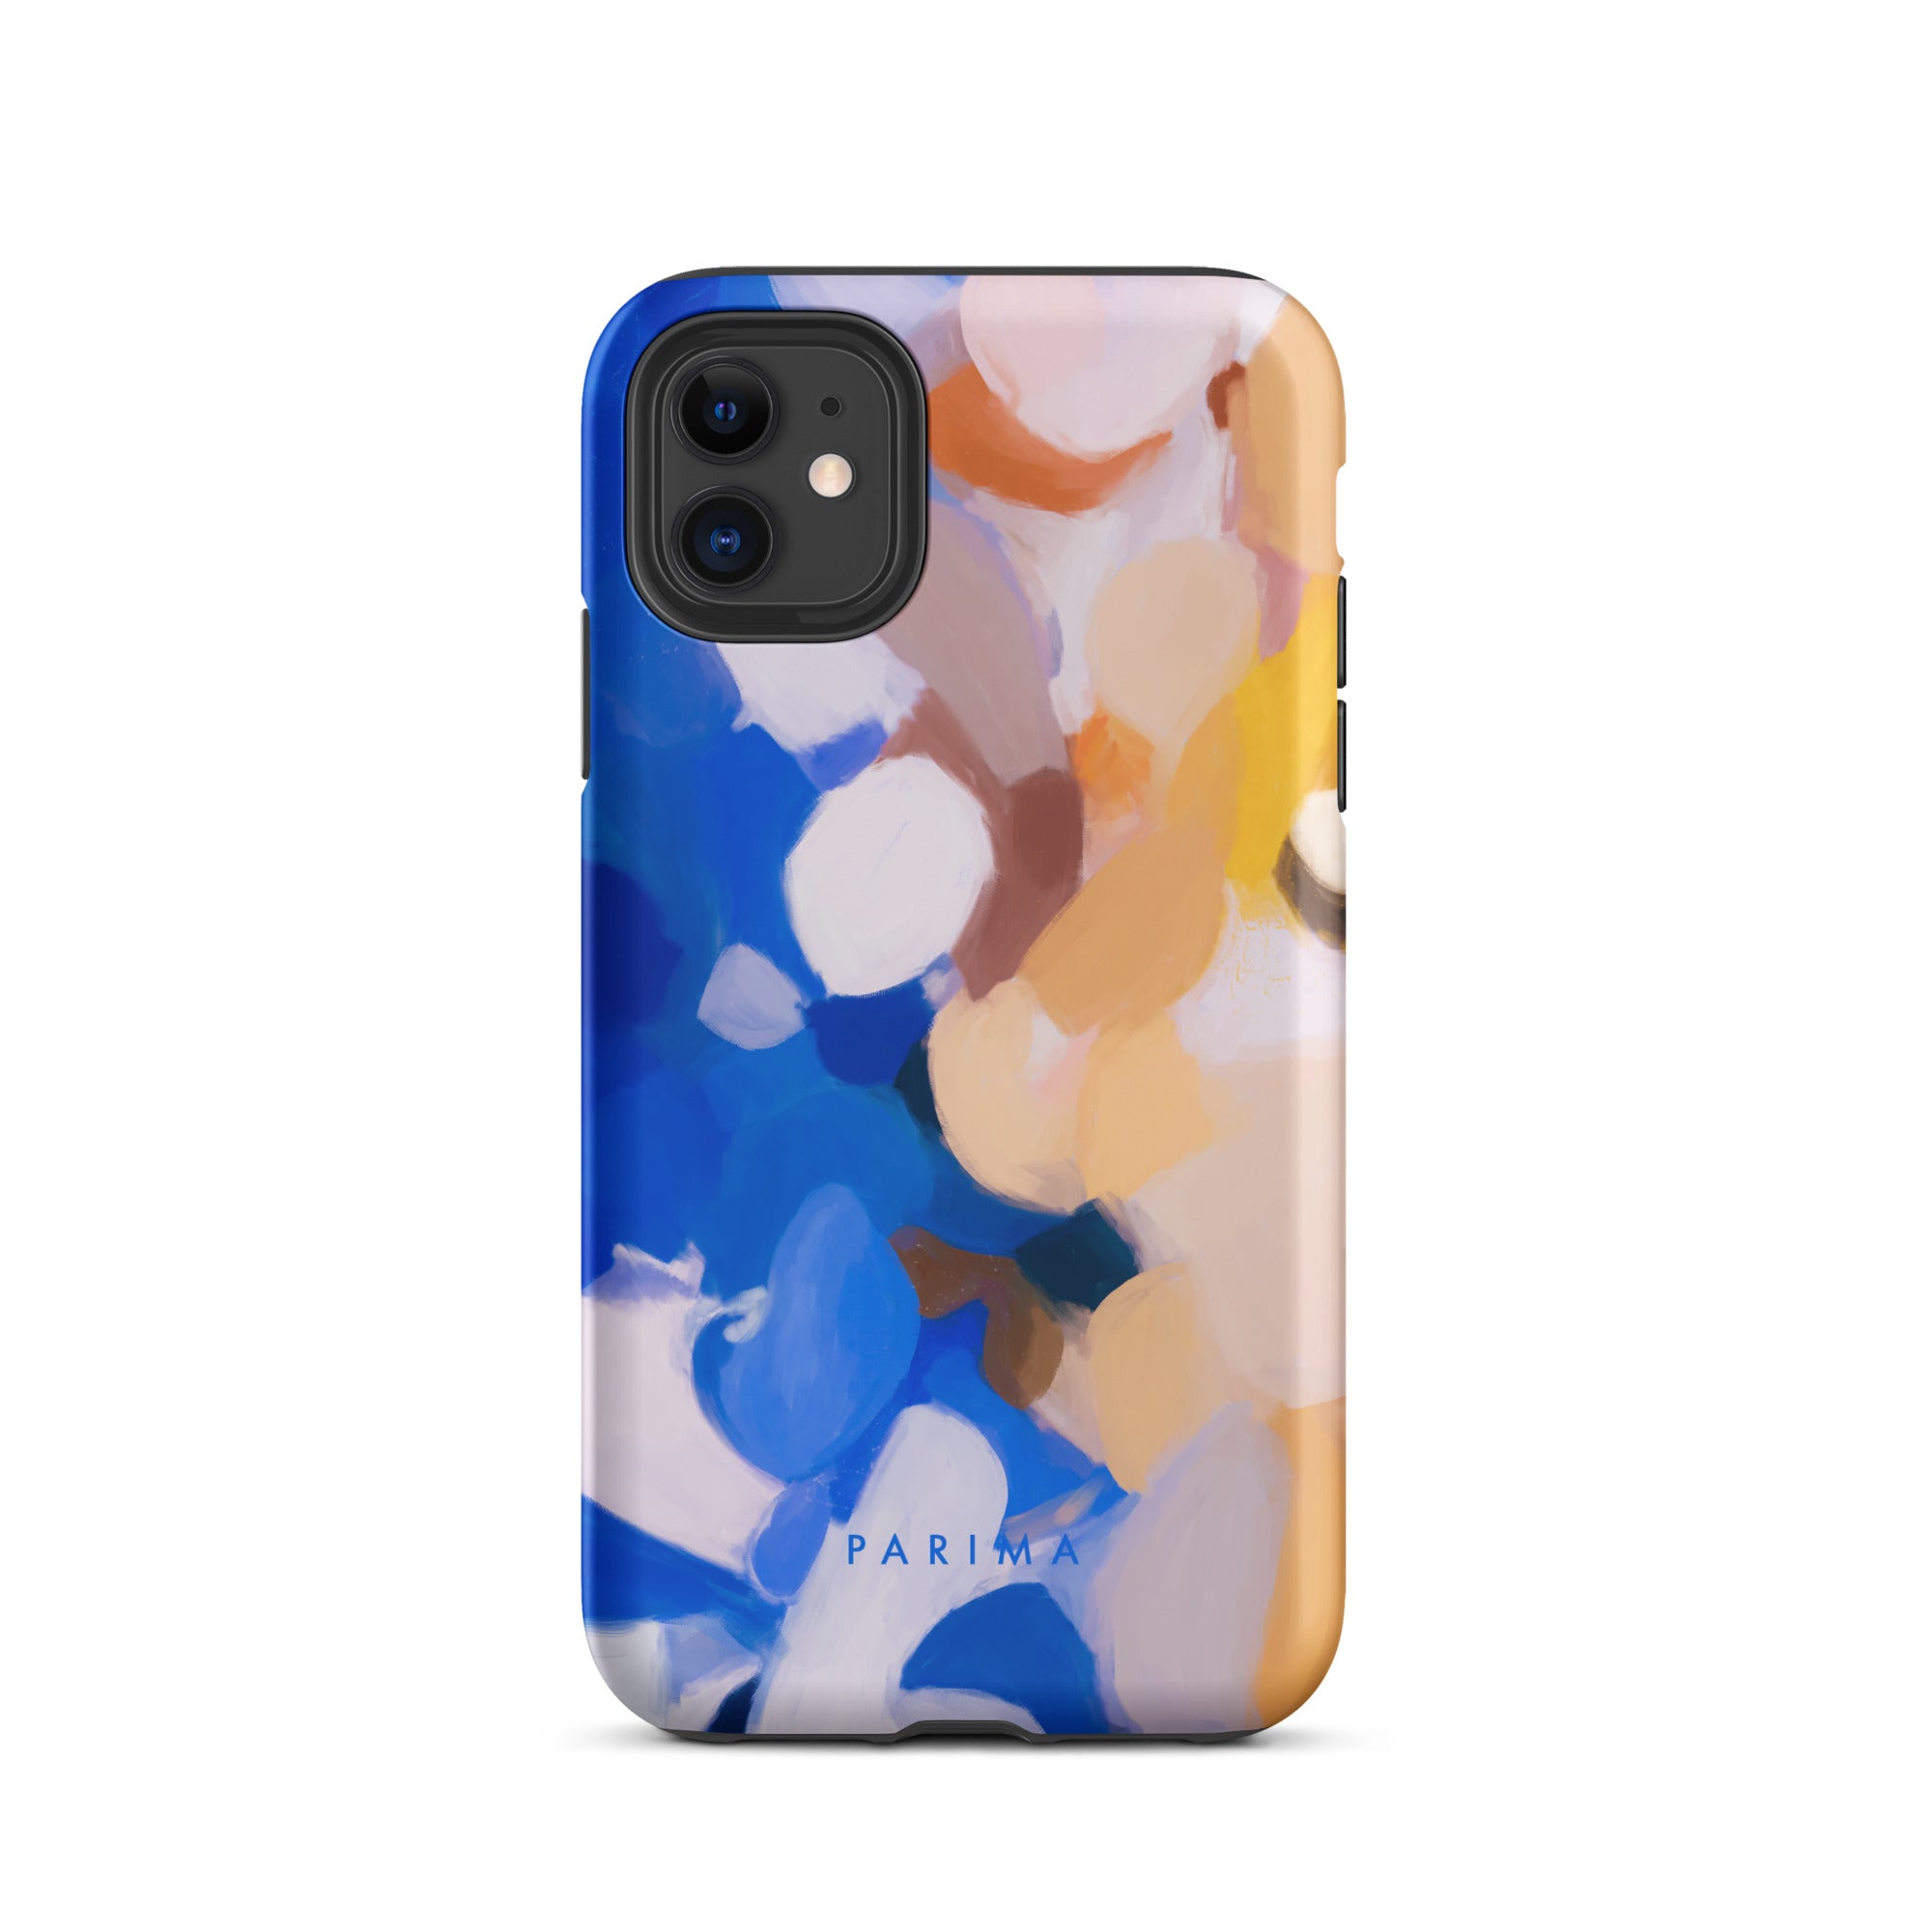 Bluebell, blue and yellow abstract art - iPhone 11 tough case by Parima Studio